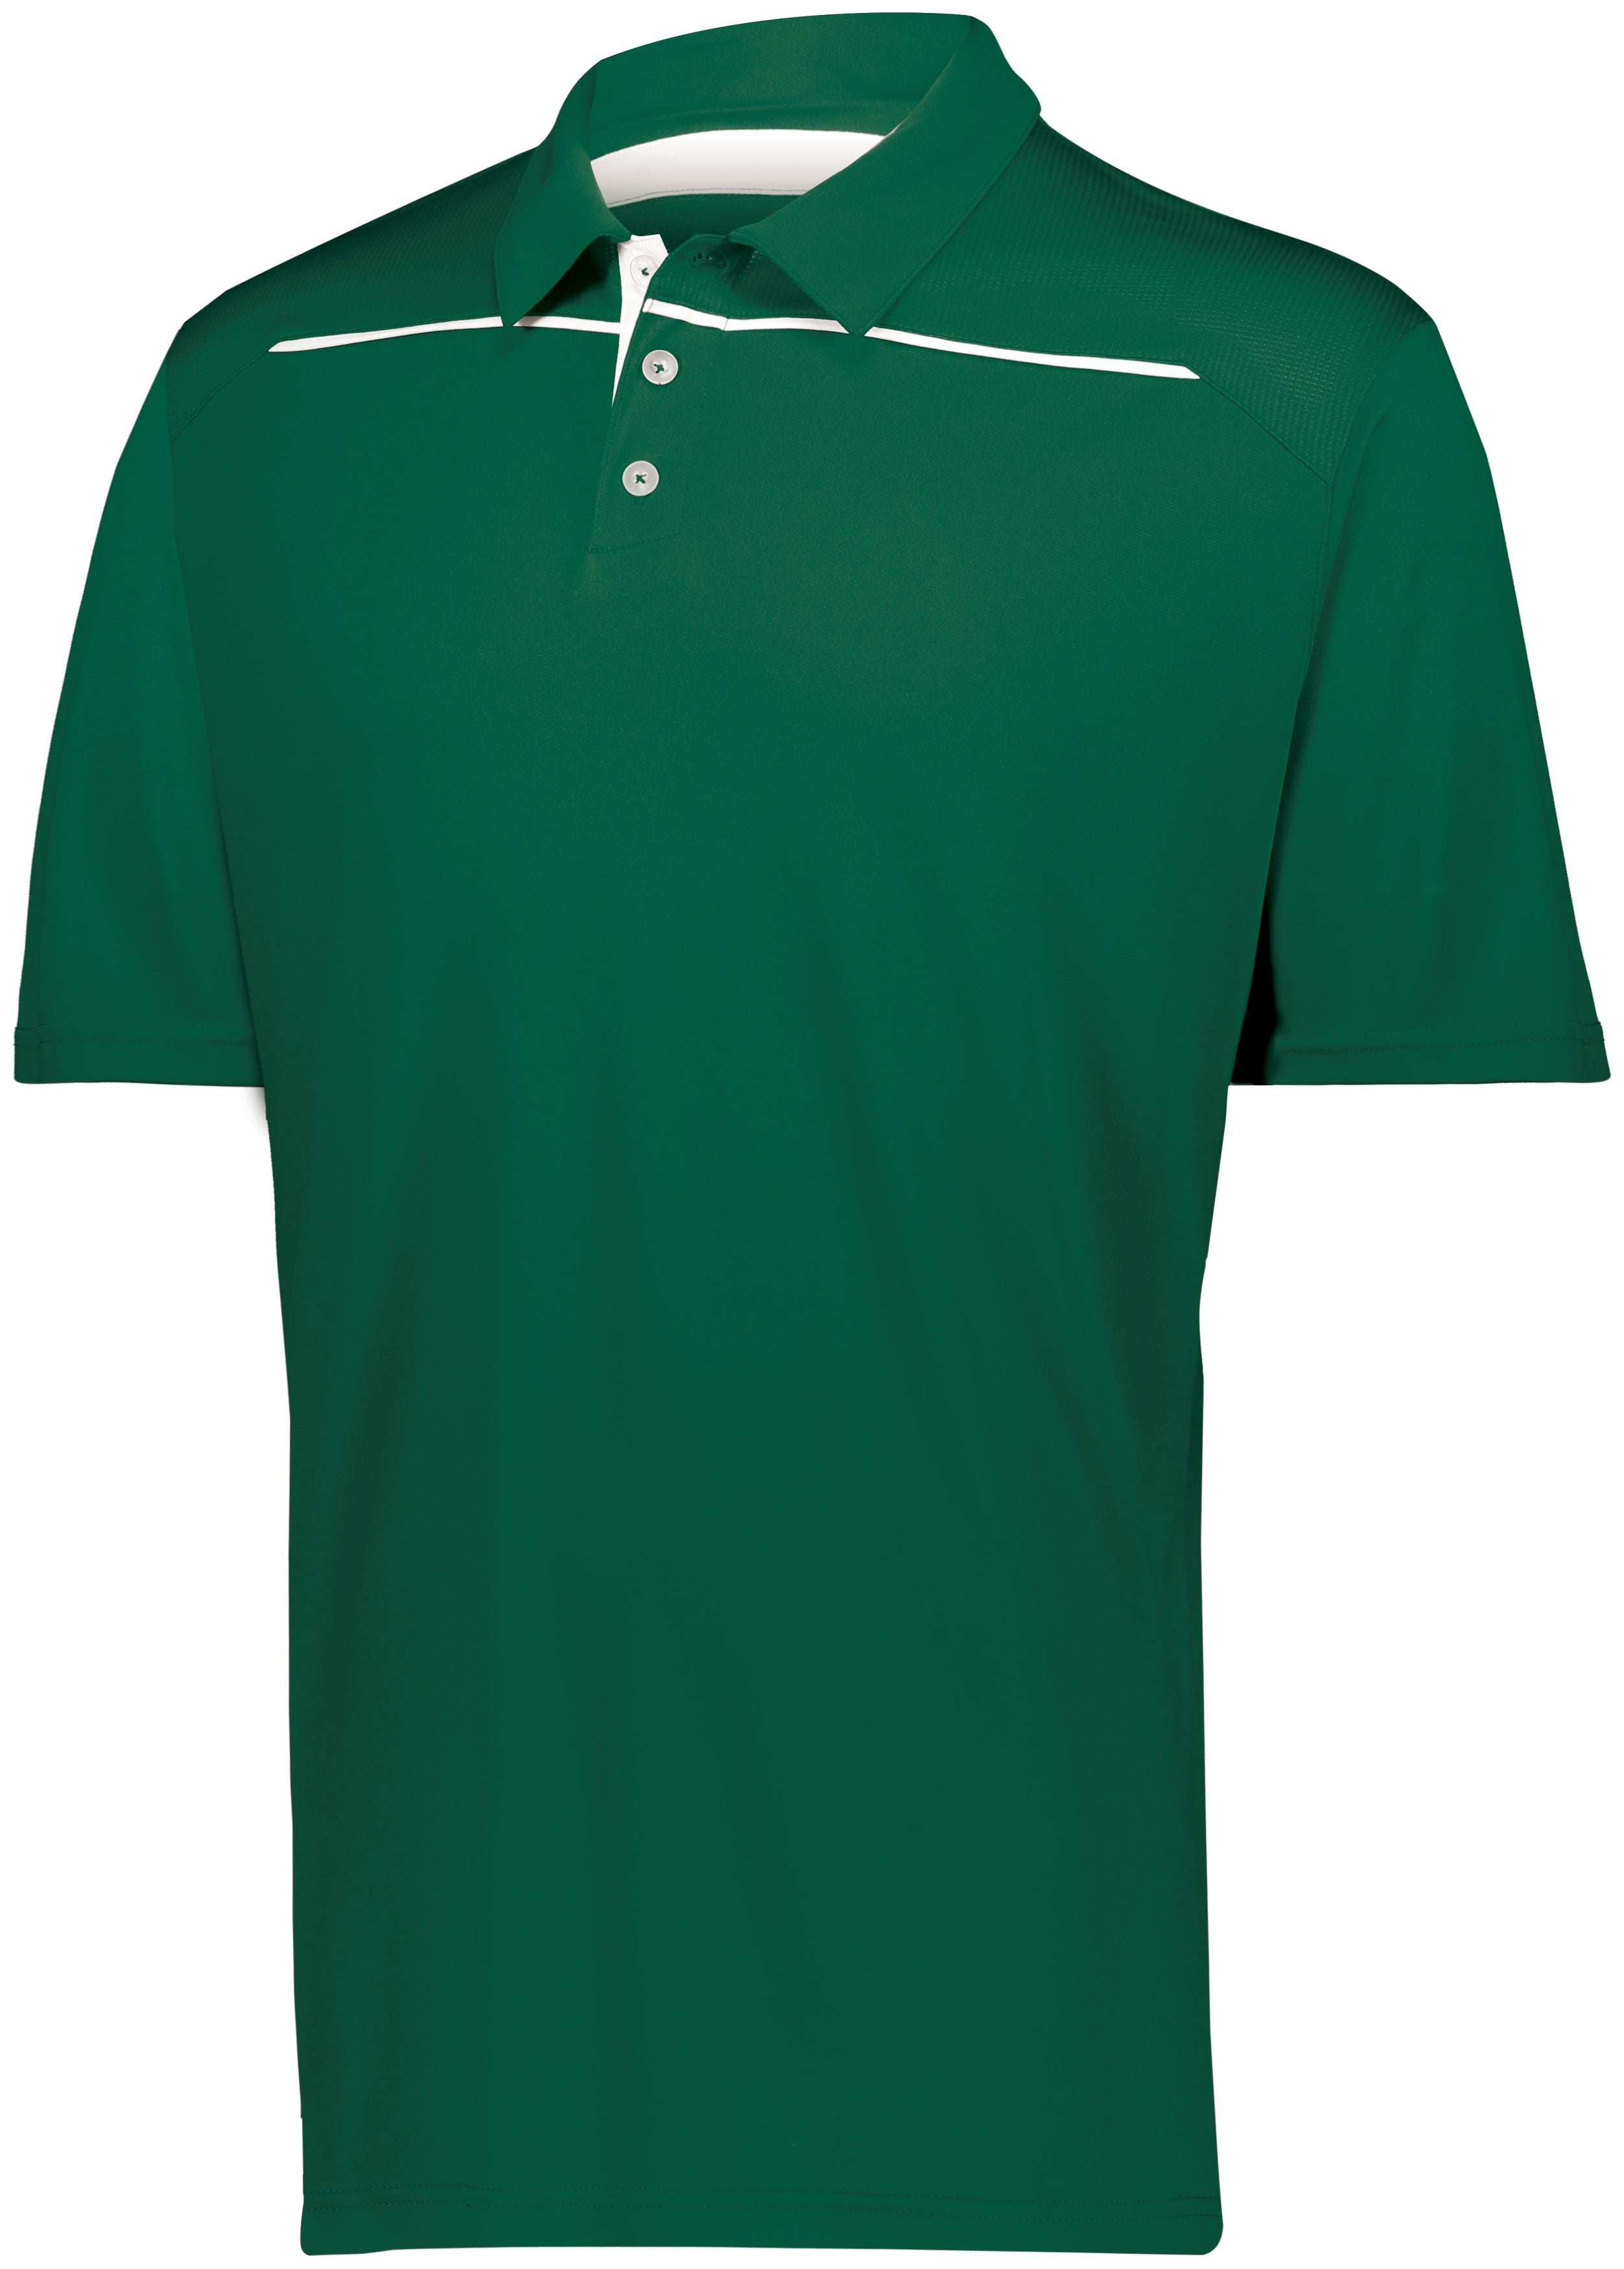 Holloway Defer Polo in Forest/White  -Part of the Adult, Adult-Polos, Polos, Holloway, Shirts product lines at KanaleyCreations.com